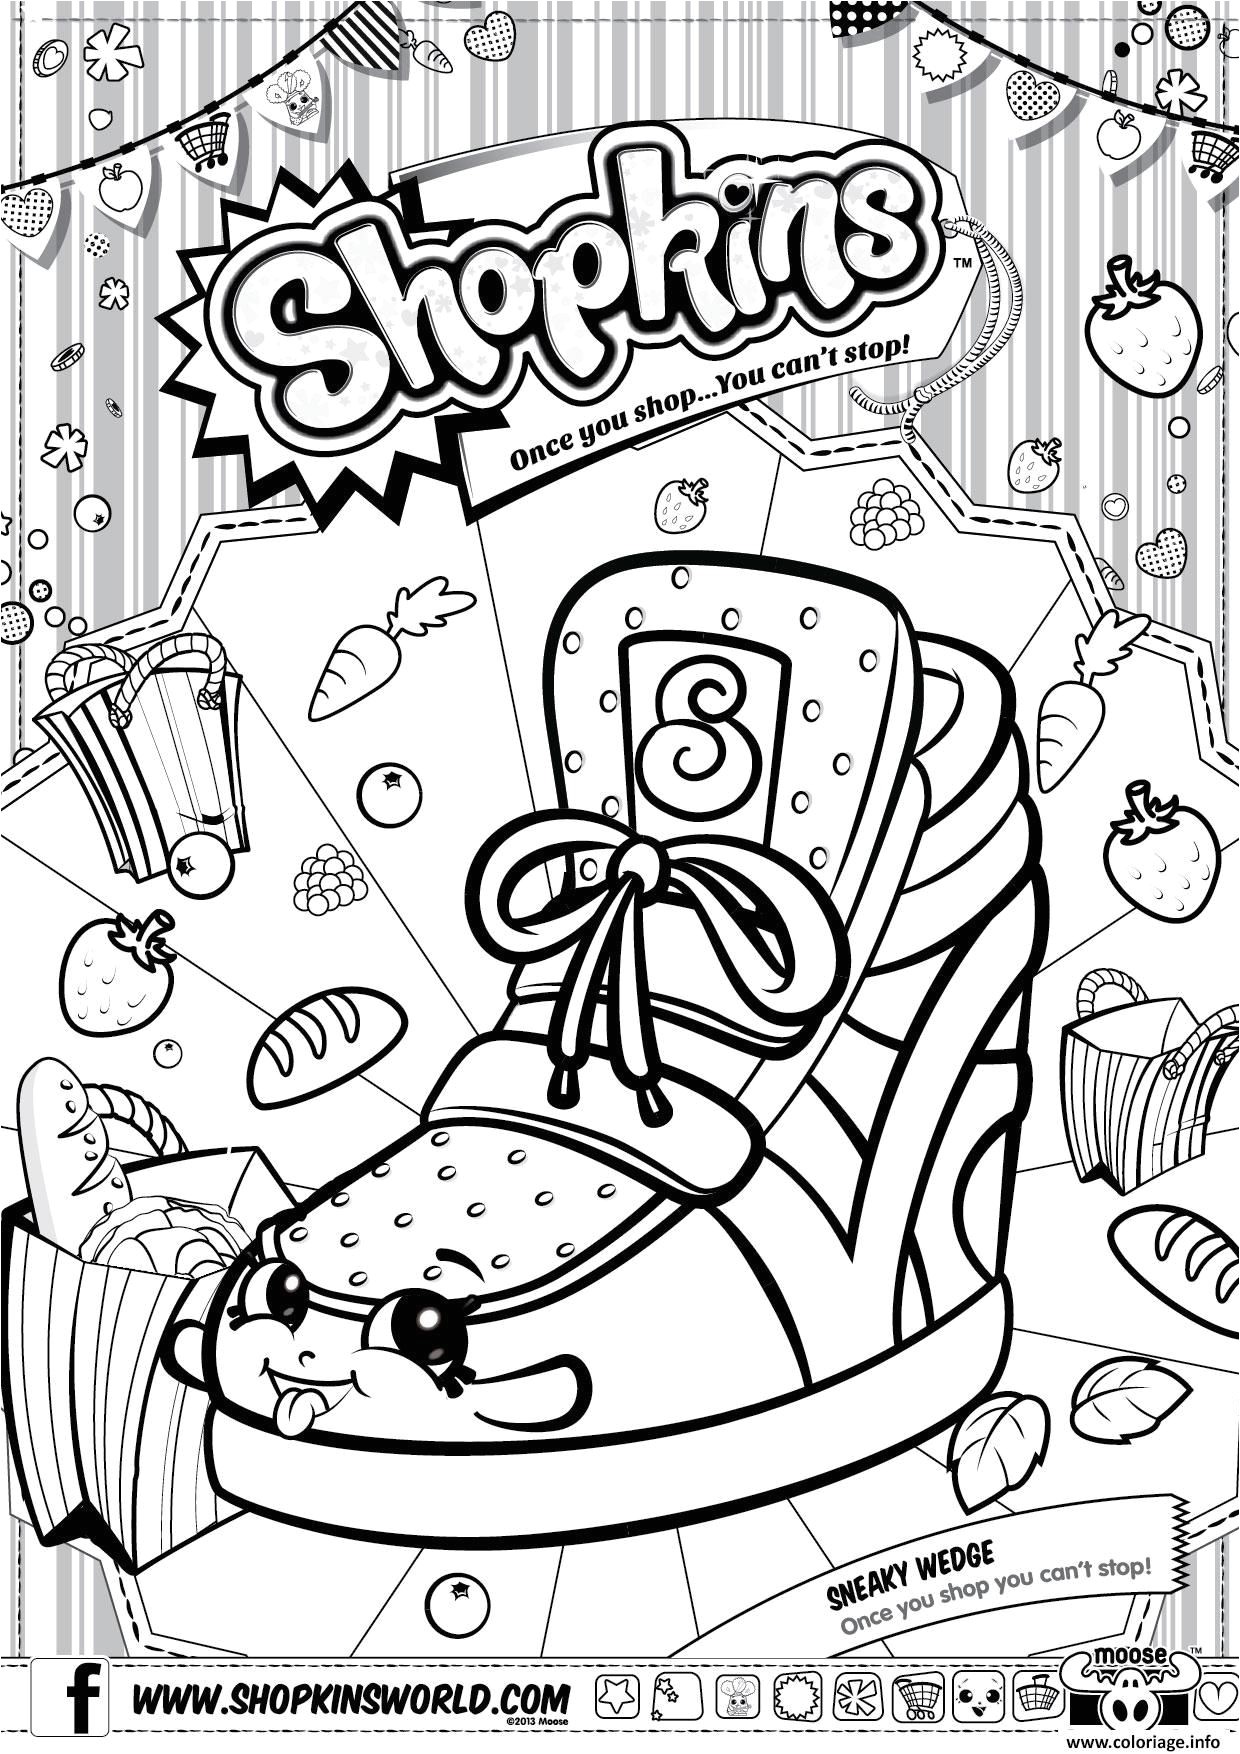 Coloriage shopkins sneaky wedge Dessin   Imprimer